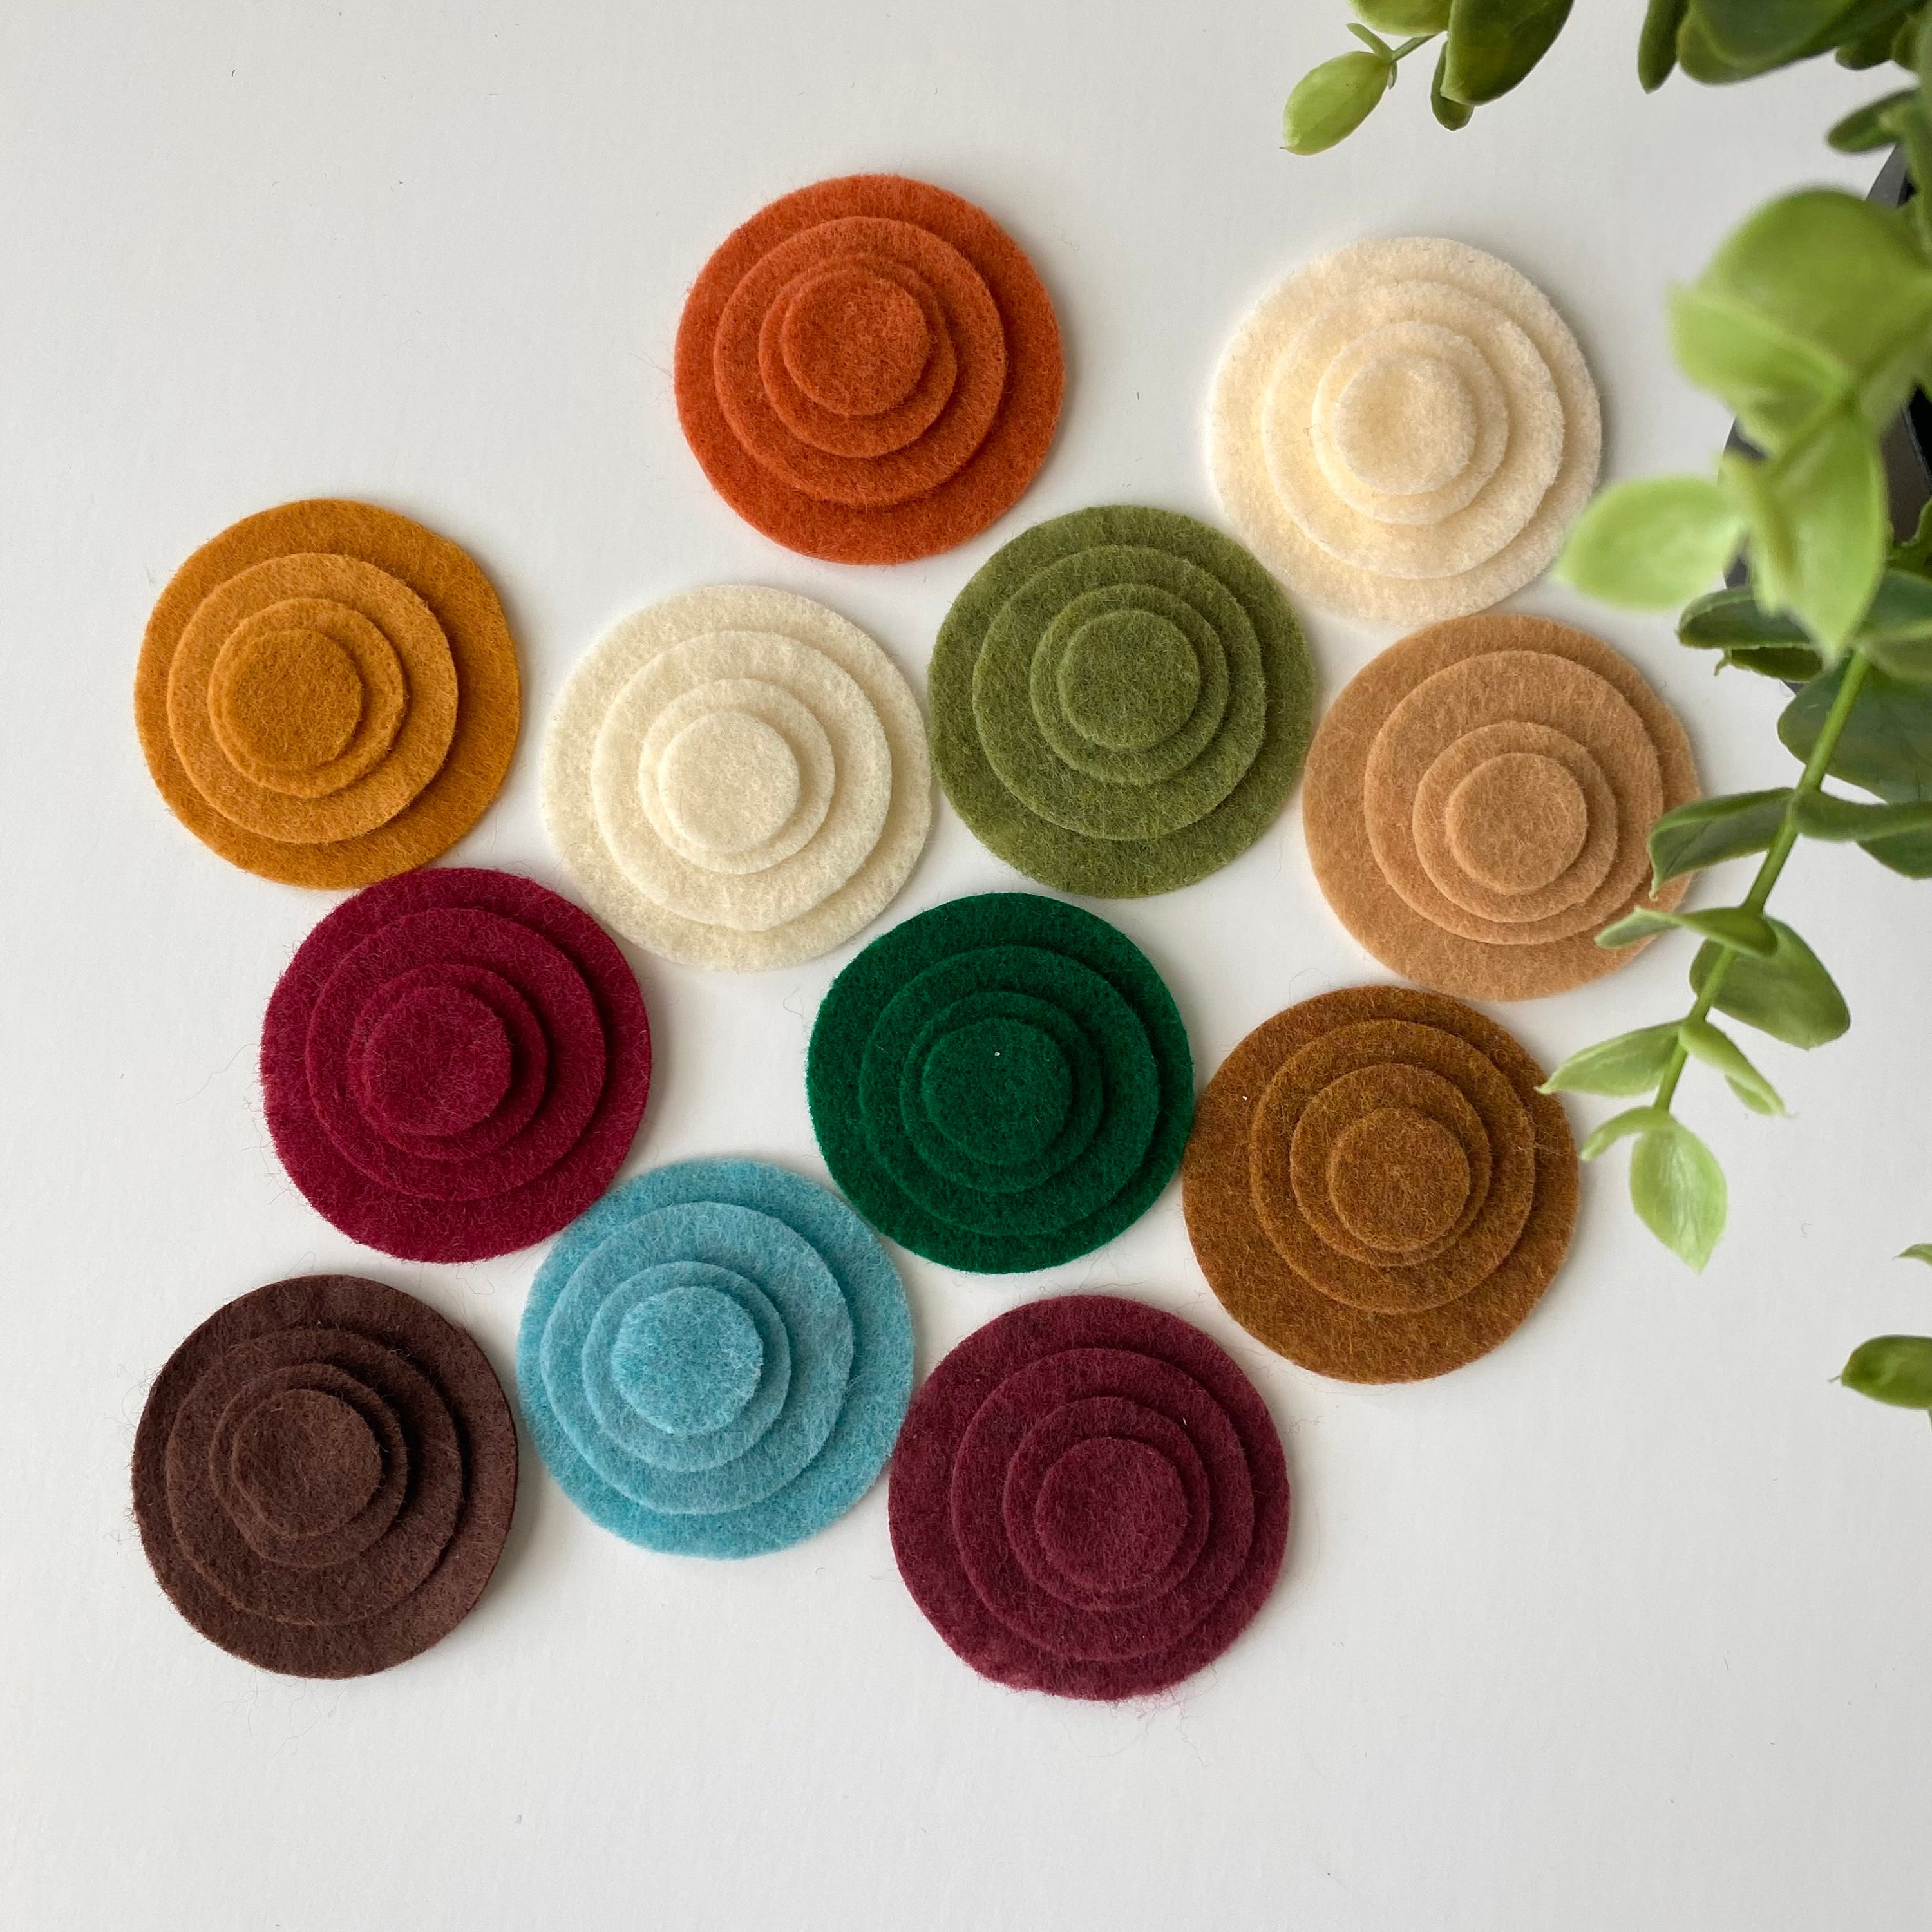 Self-adhesive Felt Circles 1-1/2 Inch Sticky Variety Pack of 50